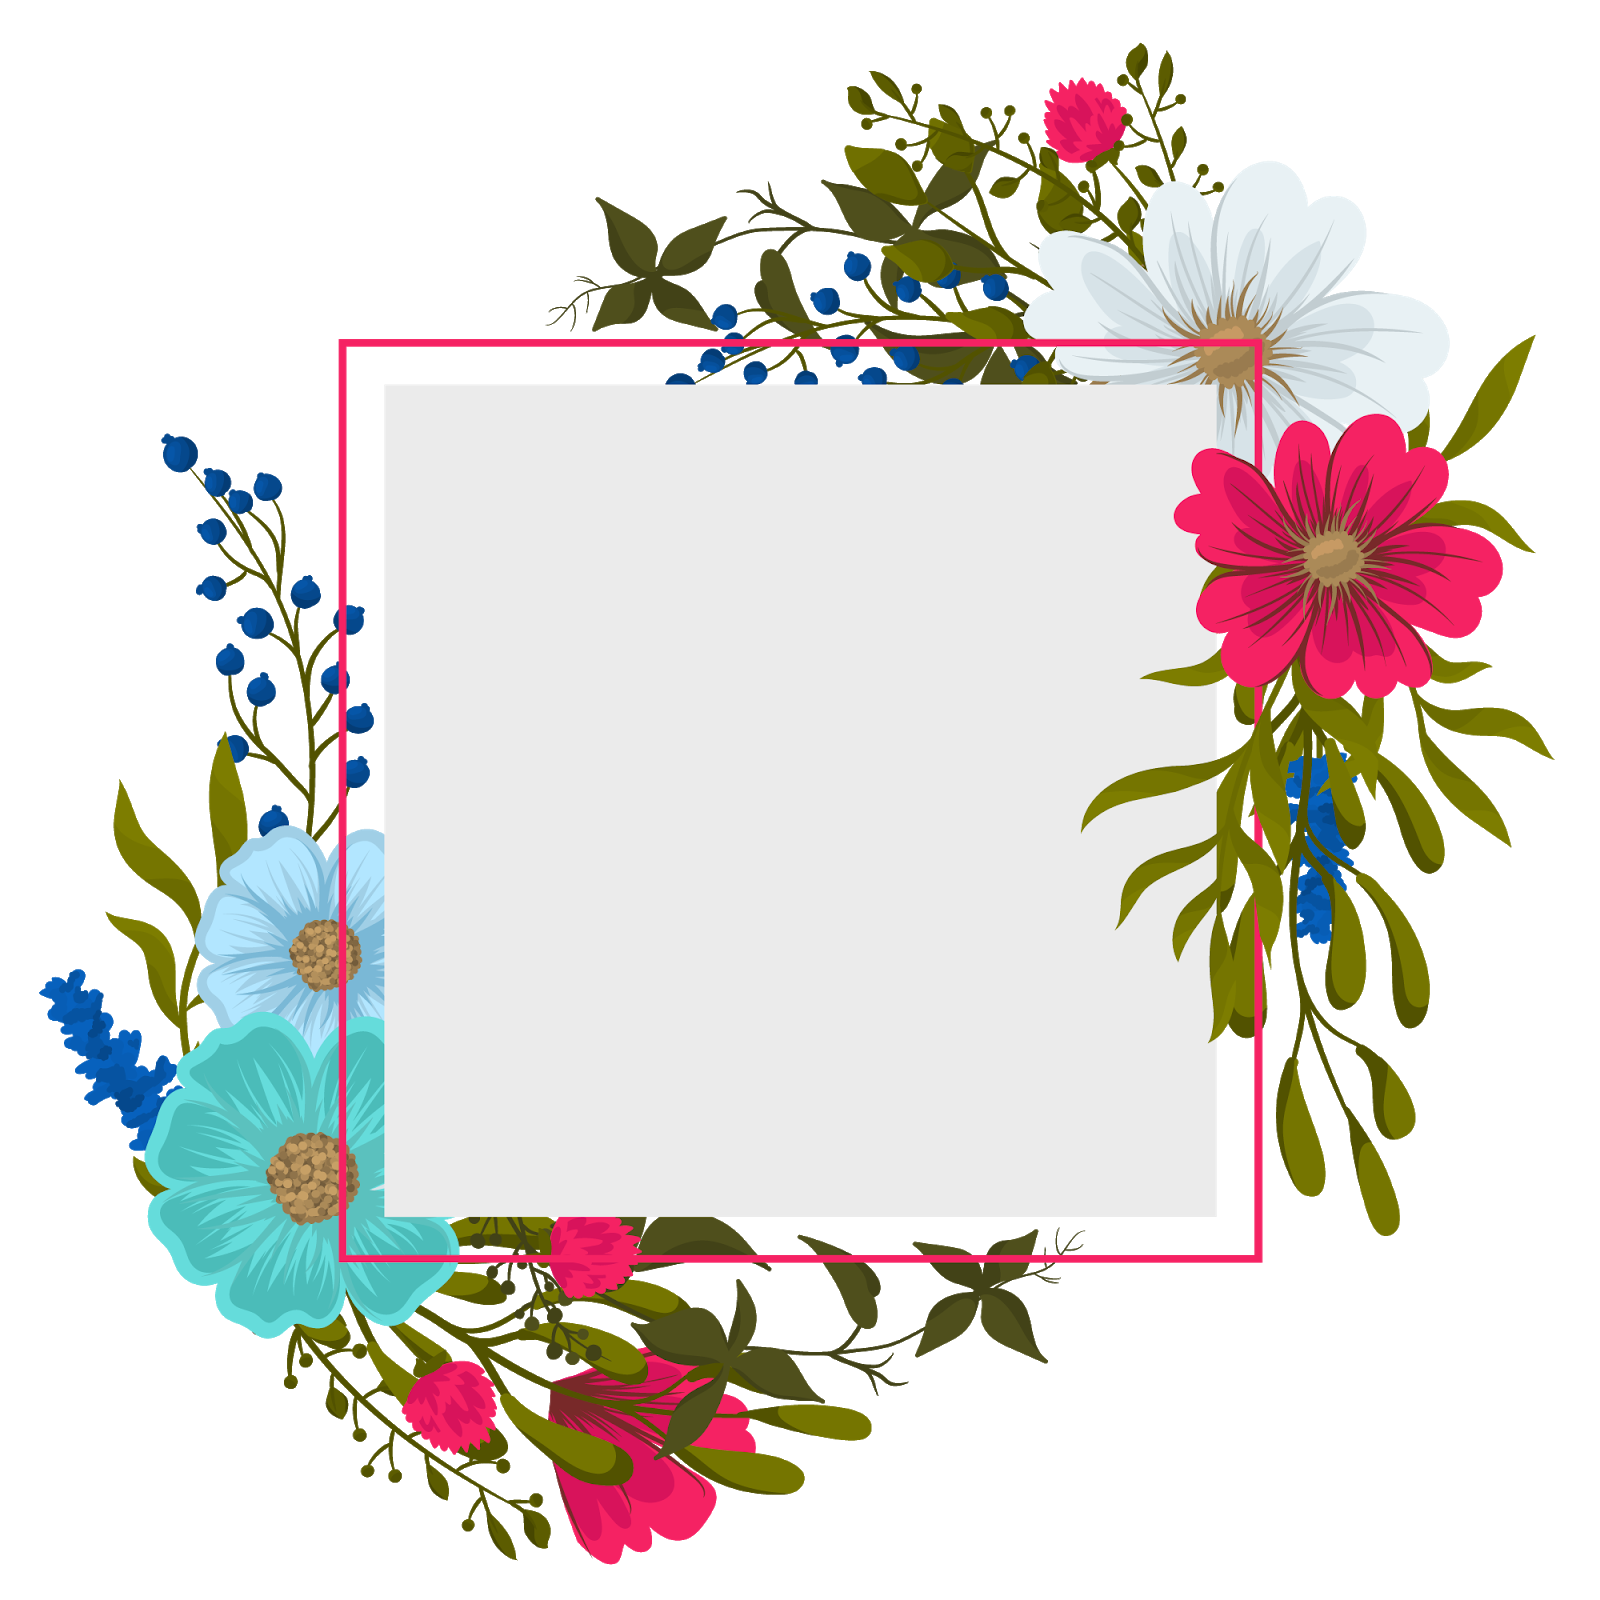 Floral Frame Png Images Transparent Background Png Play | Images and ...